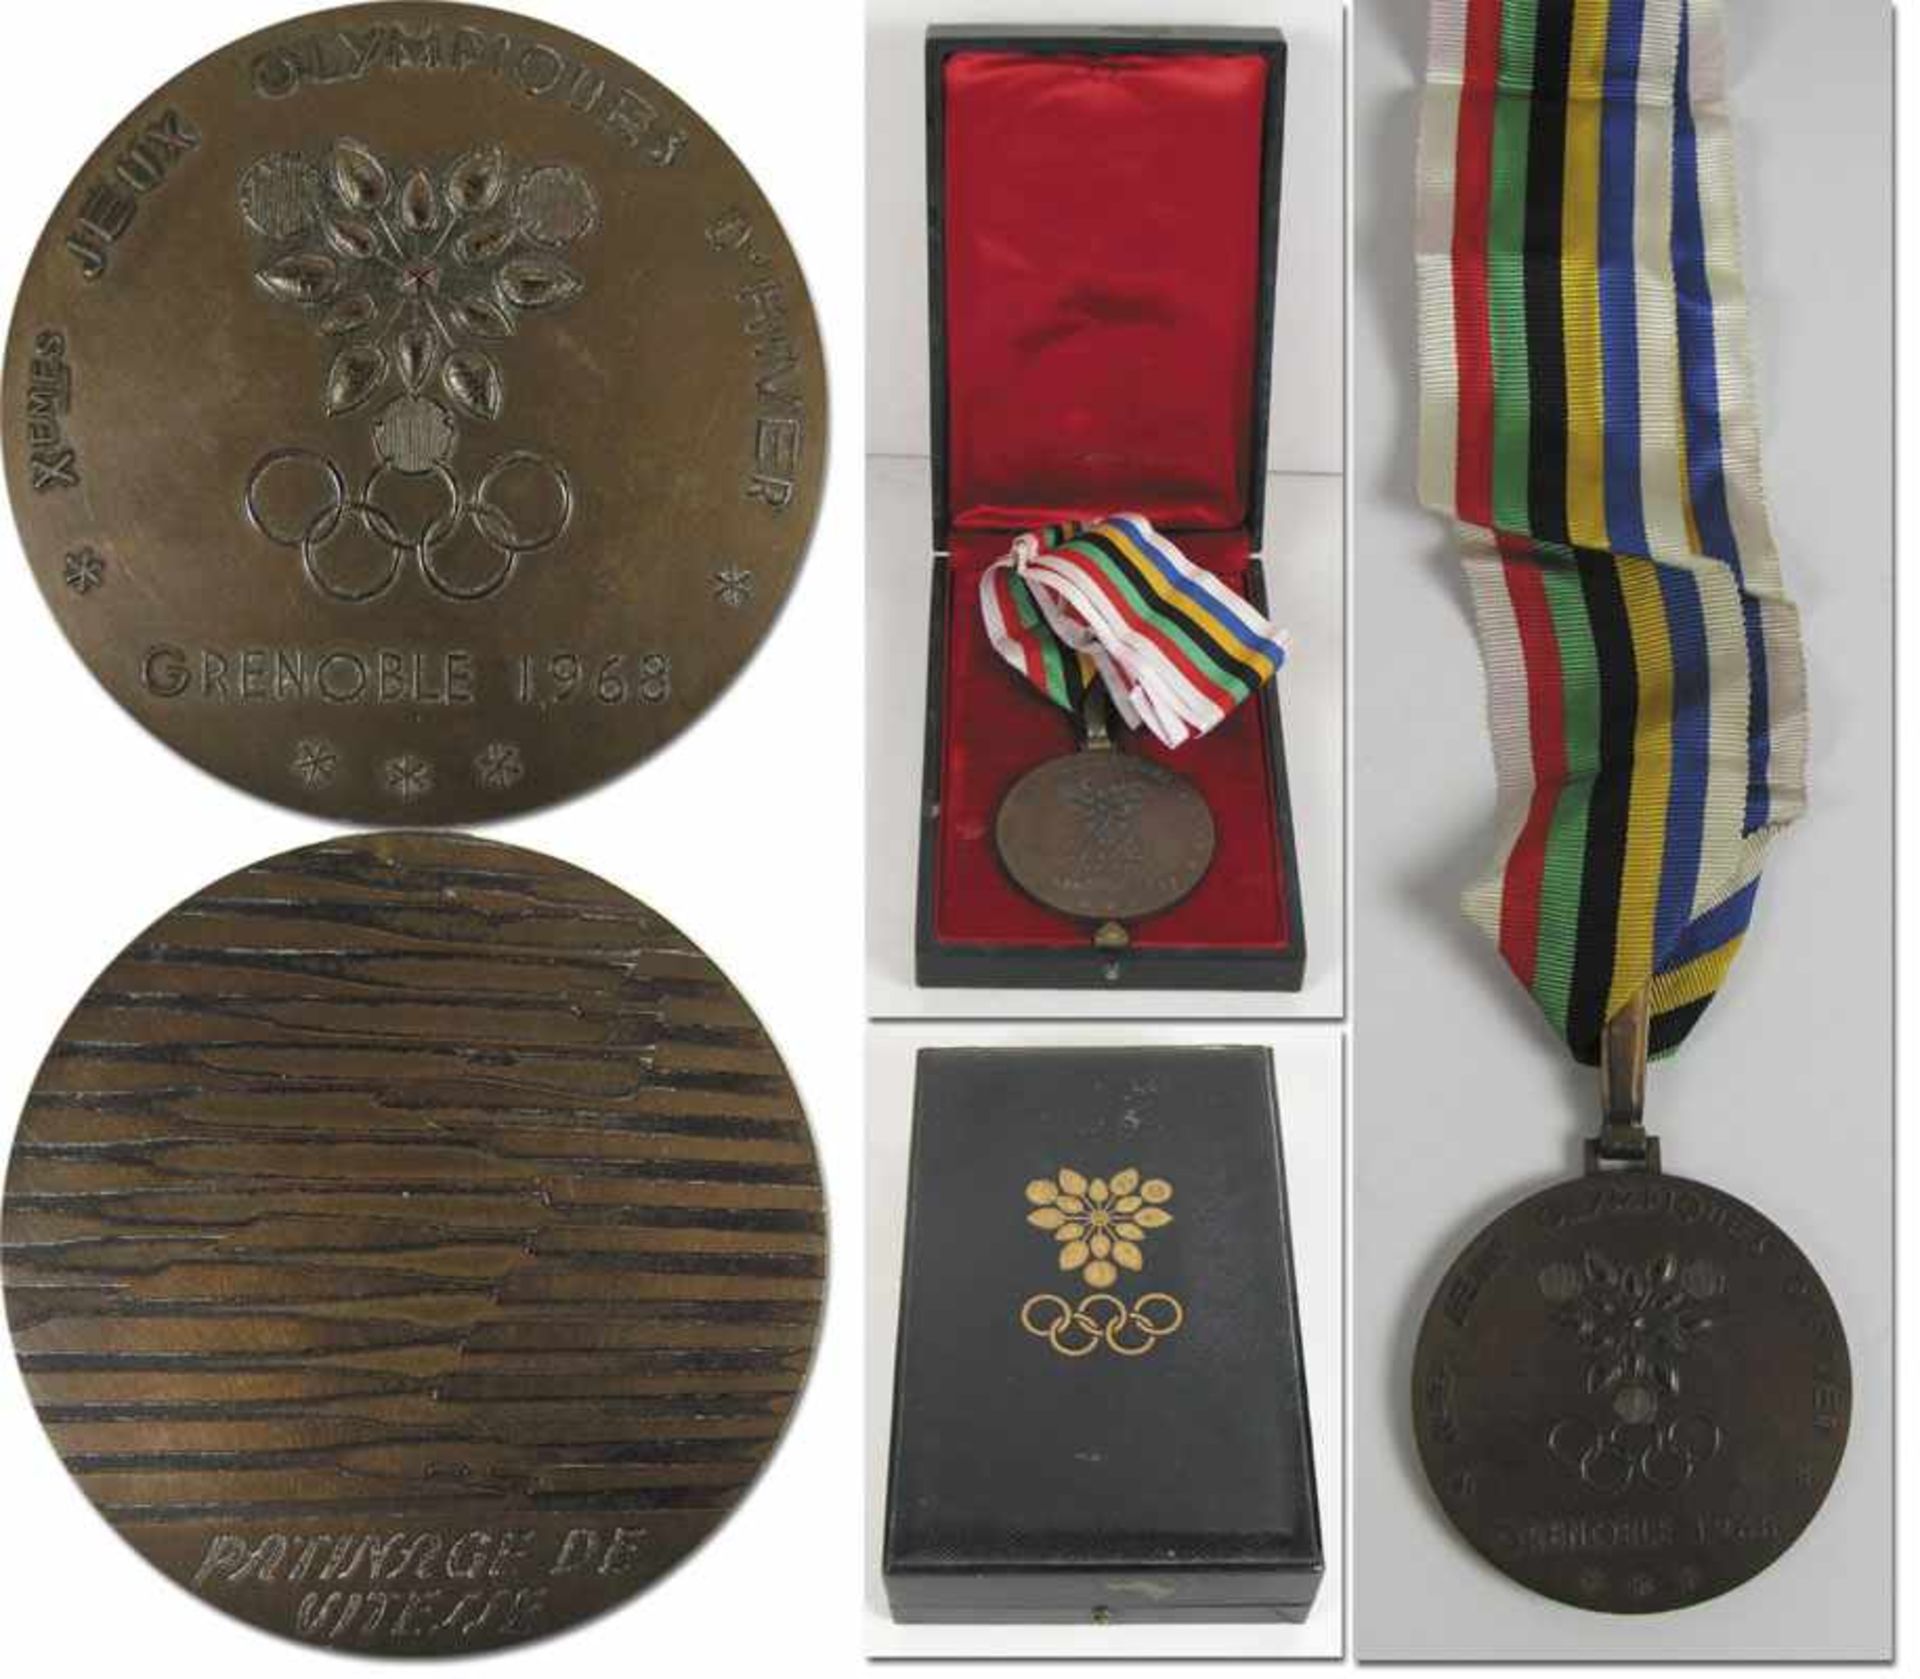 Winner's Medal: Olympic Winter Games 1968. - Winner medal for the 3rd place speed skating at the